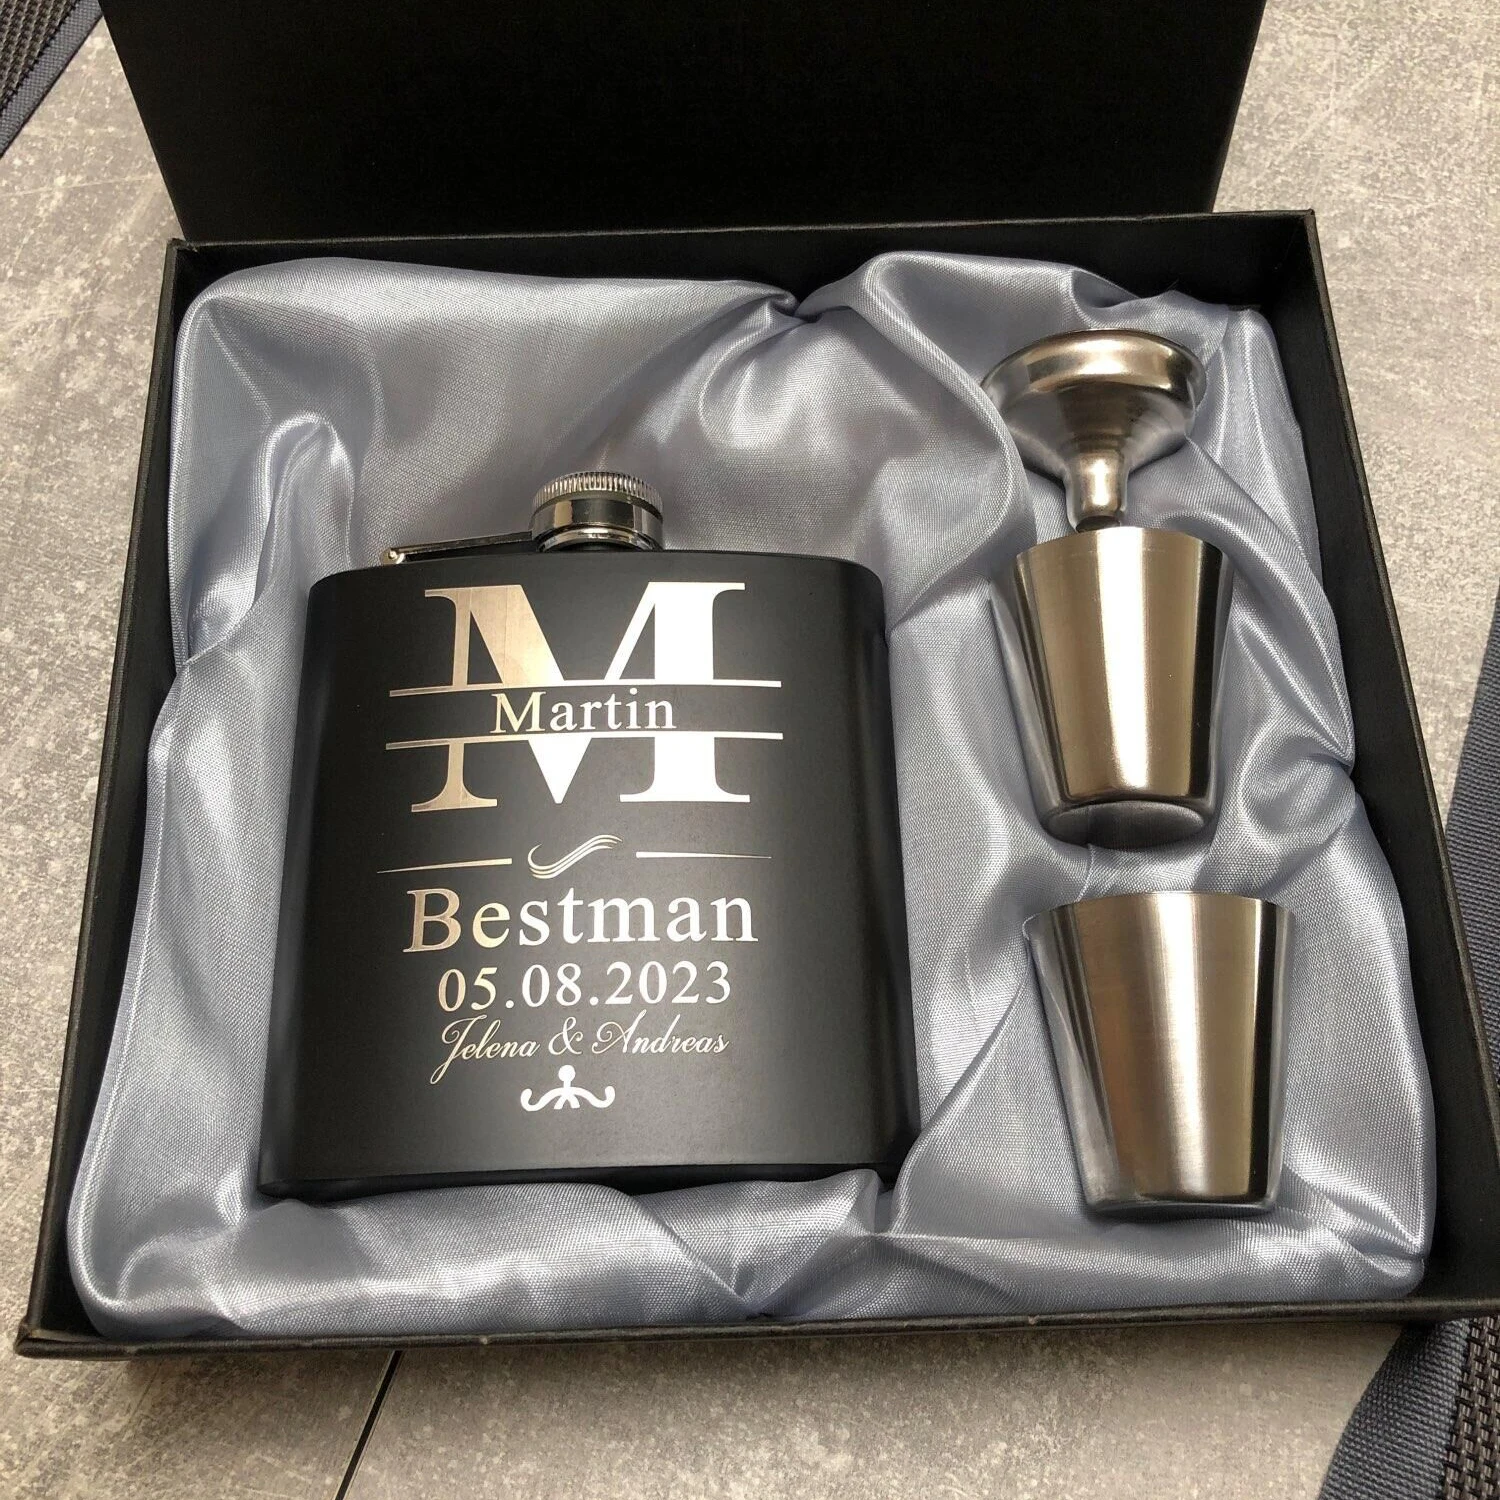 1 Set Personalized Engraved 6oz Hip Flask Stainless Steel Black Box Gifts Birthday Best Man Gifts Groomsmen Gifts Wedding Favors